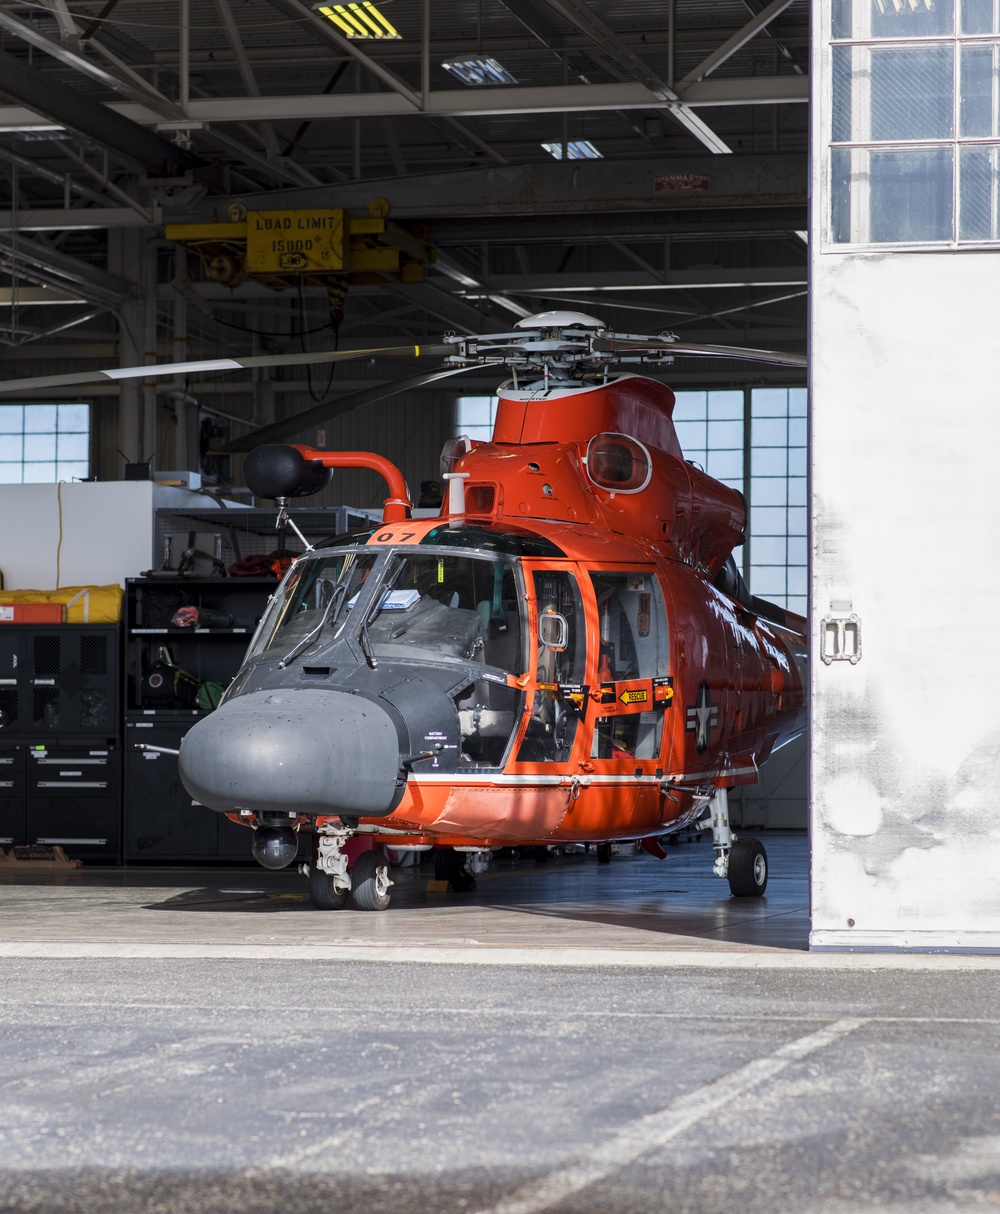 A Coast Guard MH-65 Dolphin helicopter stands ready inside Forward Operating Base Point Mugu